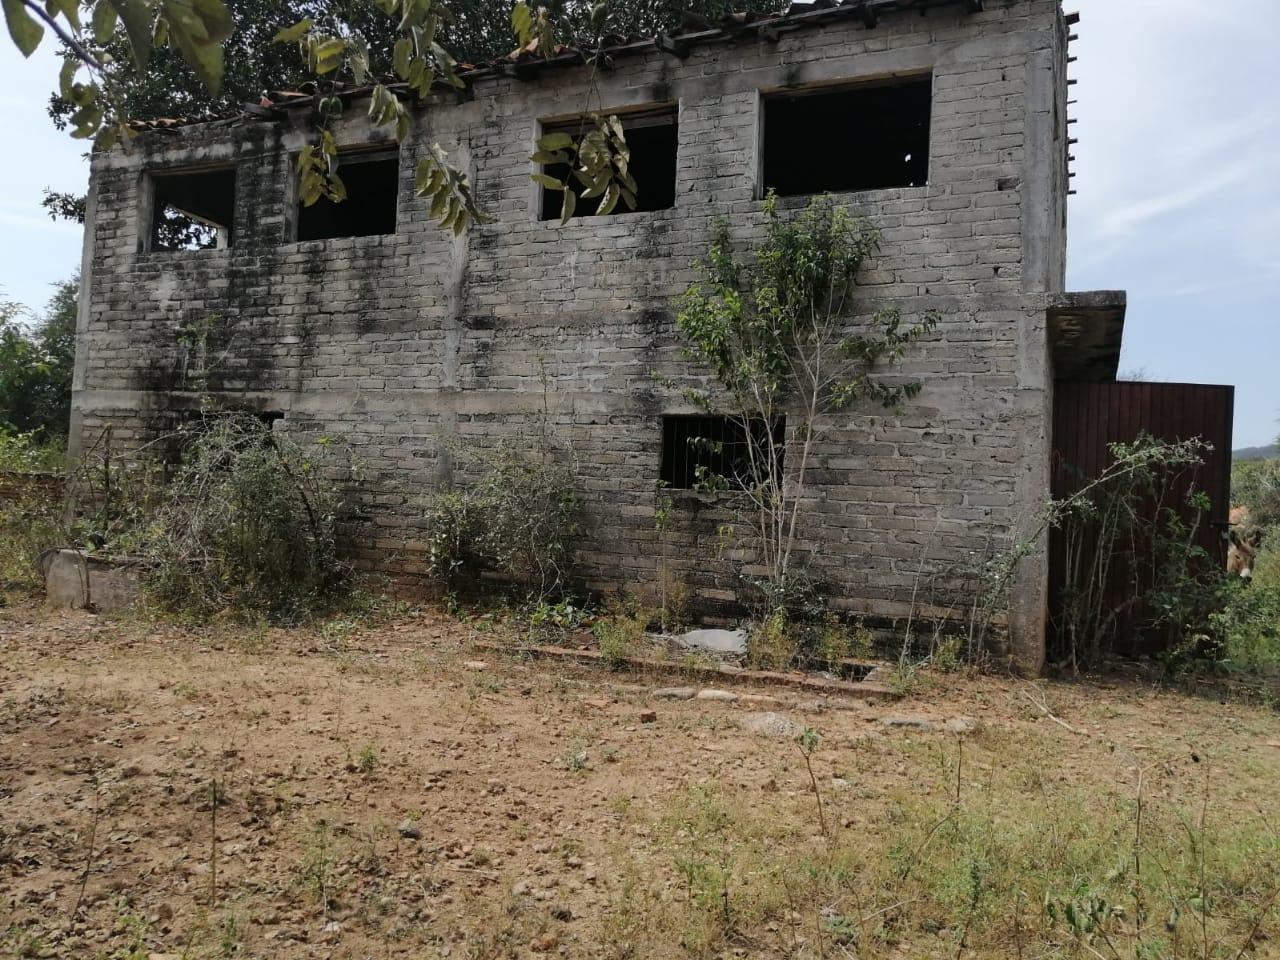 My old house, vacated when Ajoya became a ghost town, had long since deteriorated into ruins.